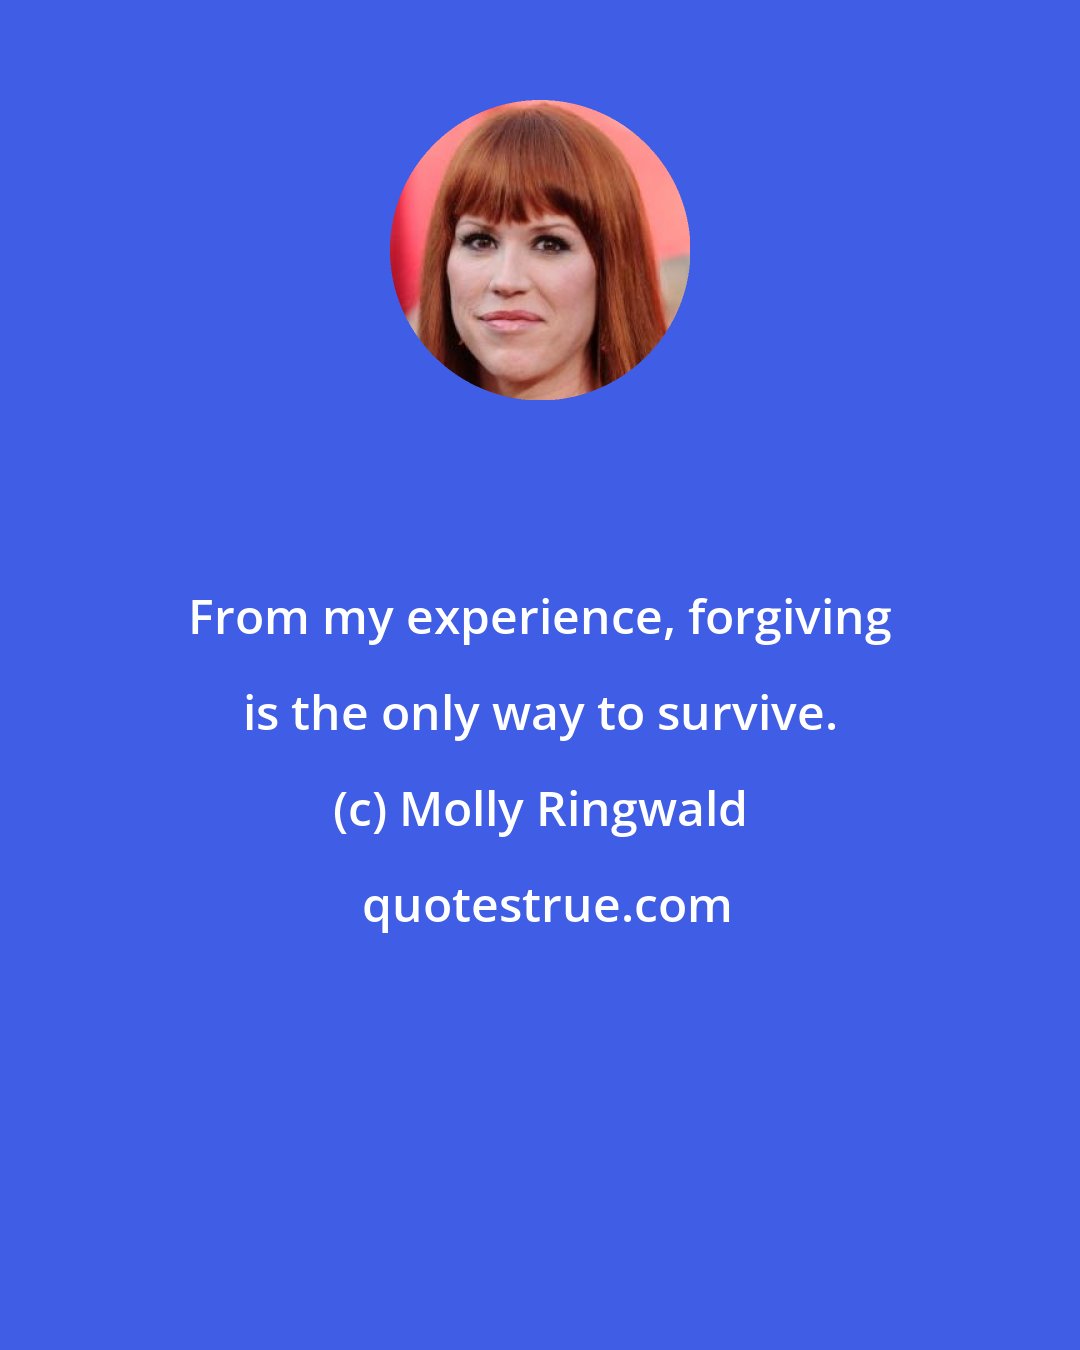 Molly Ringwald: From my experience, forgiving is the only way to survive.